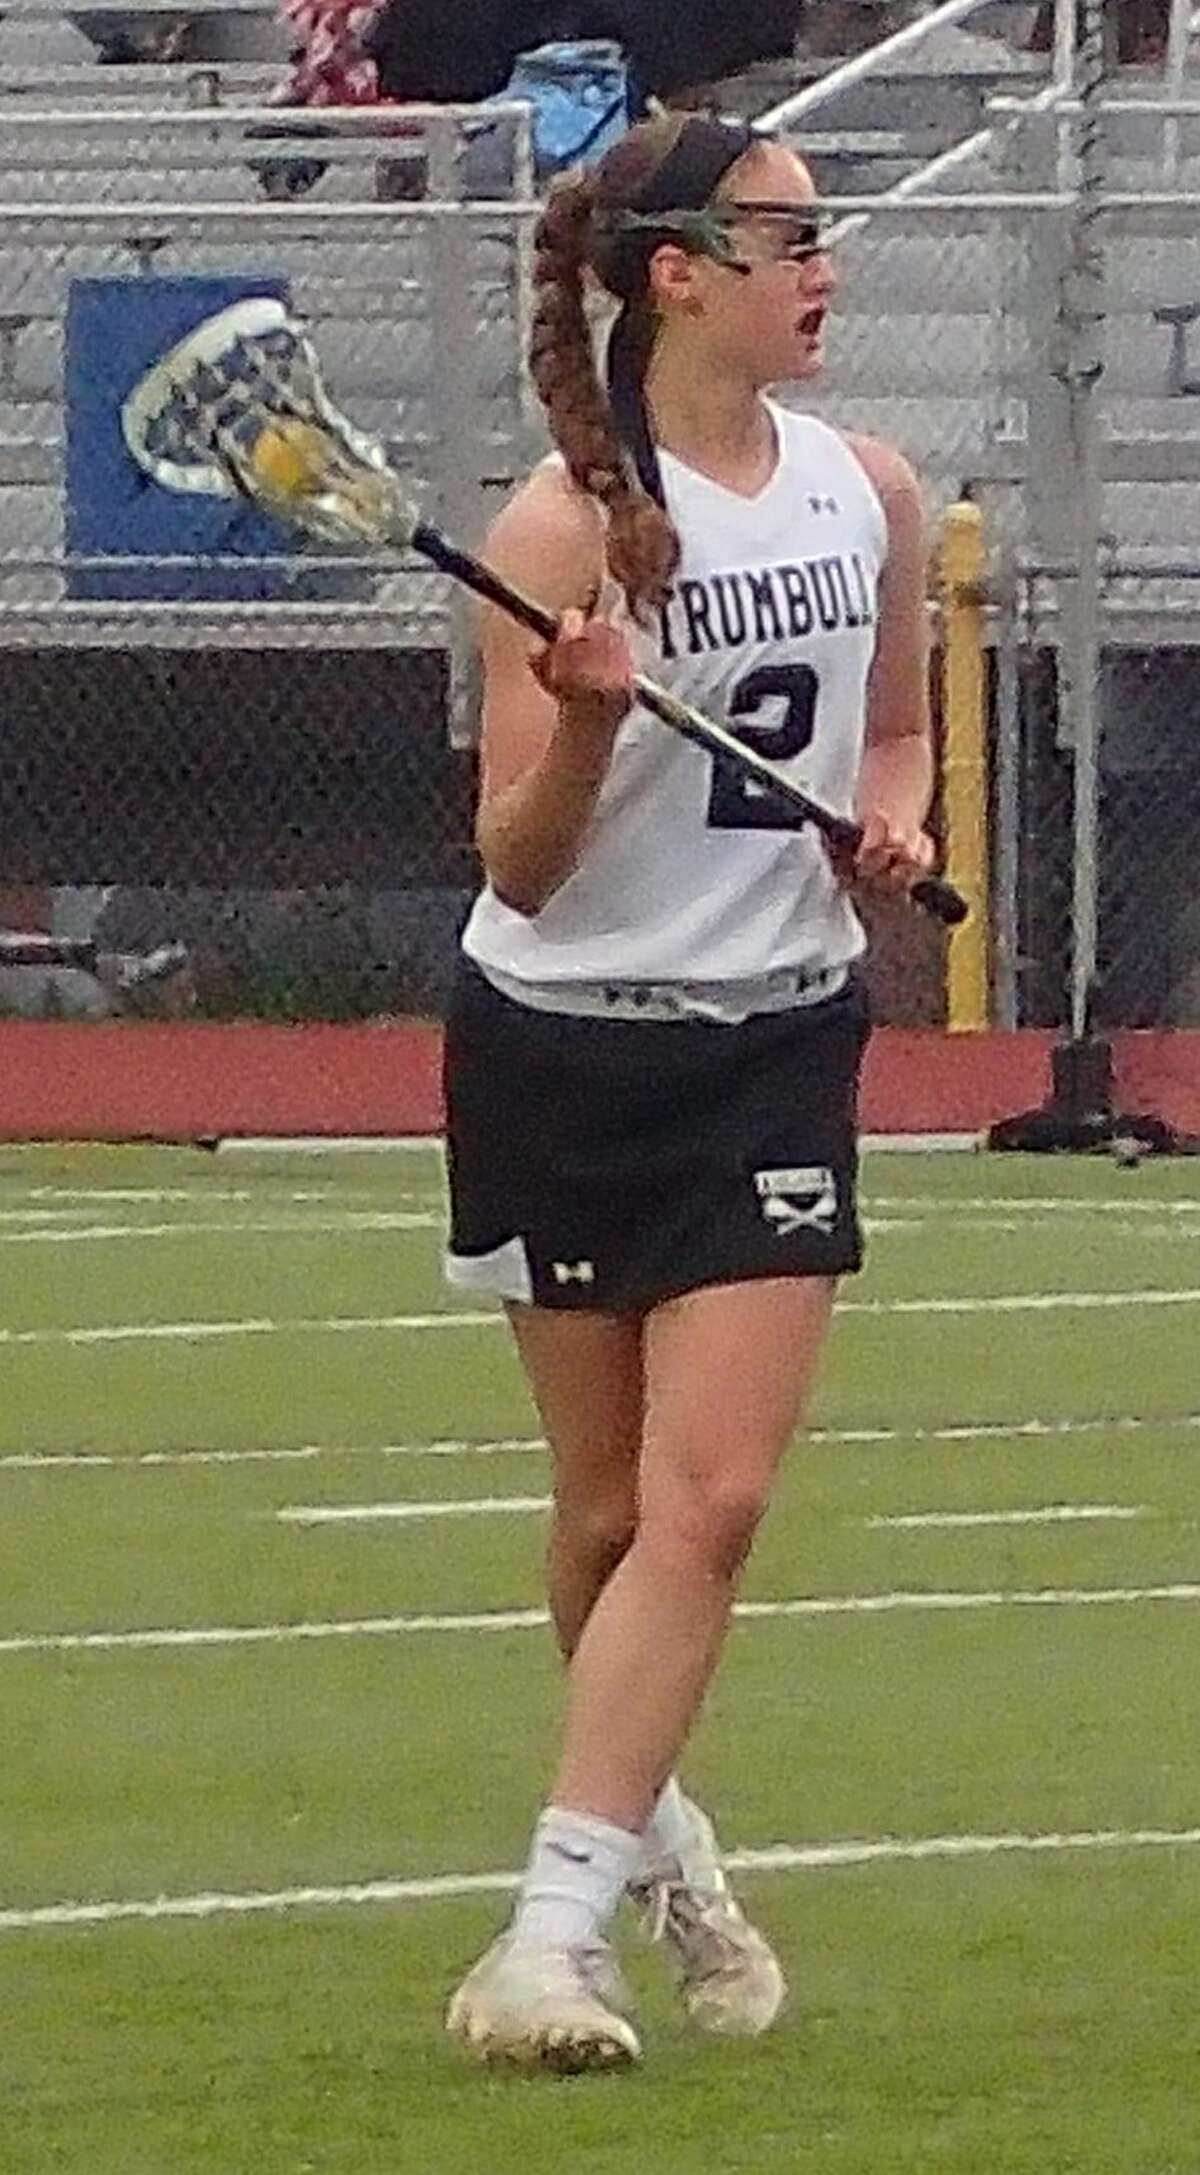 Trumbull's Sophia Hopwell scored four goals in the Eagles' 13-11 lacrosse triumph over Danbury at Trumbull High School April 26, 2016.